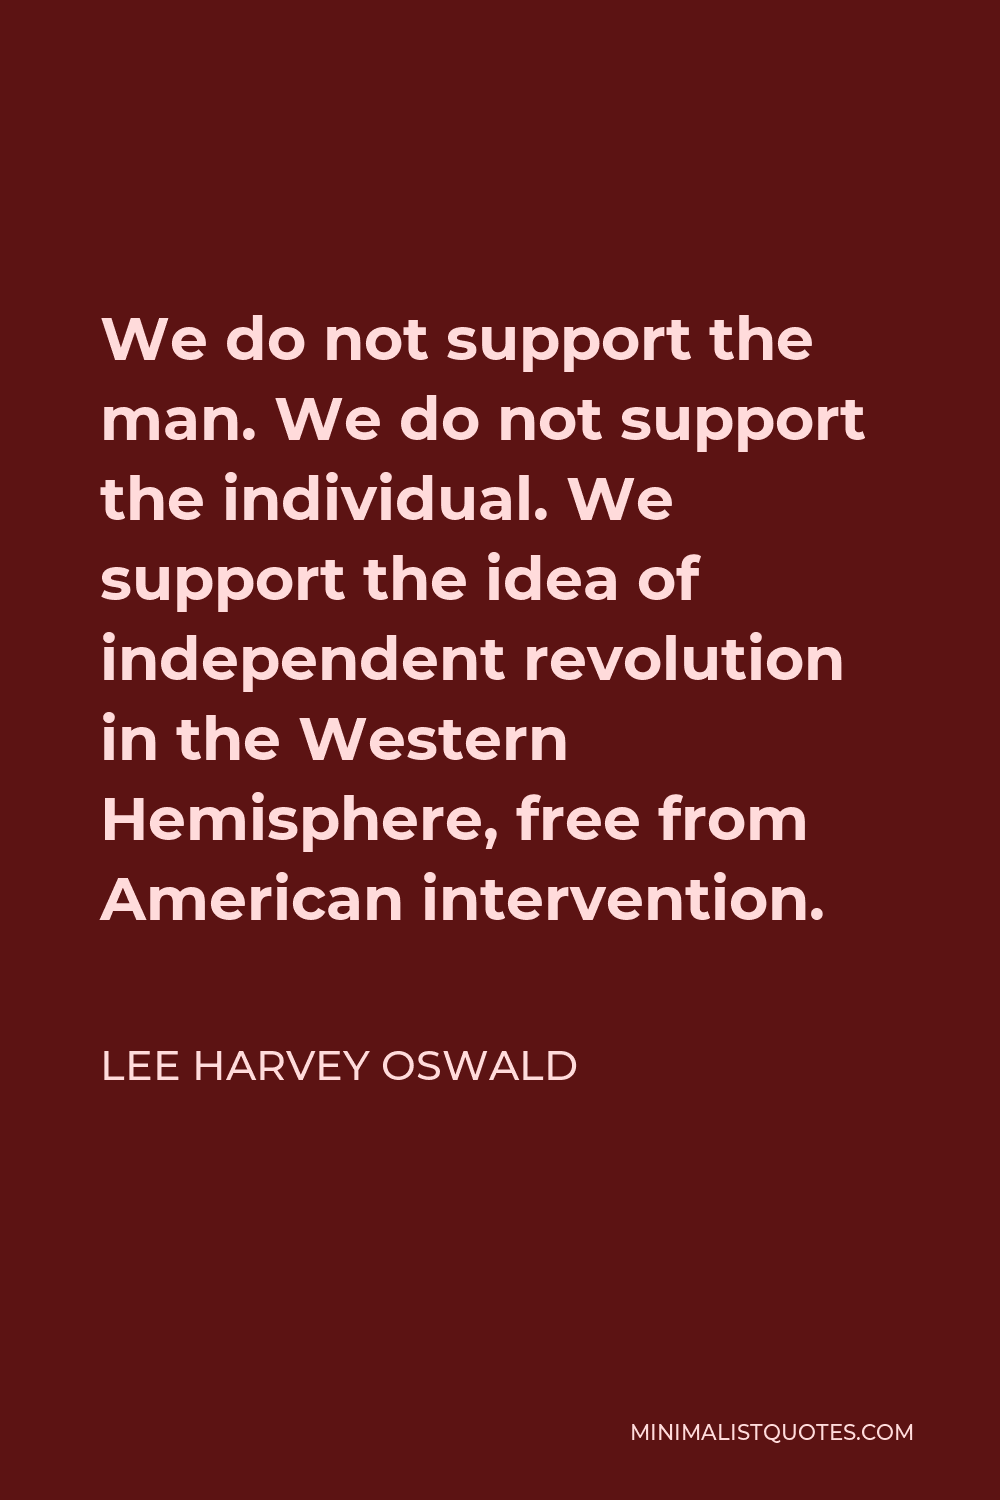 Lee Harvey Oswald Quote - We do not support the man. We do not support the individual. We support the idea of independent revolution in the Western Hemisphere, free from American intervention.